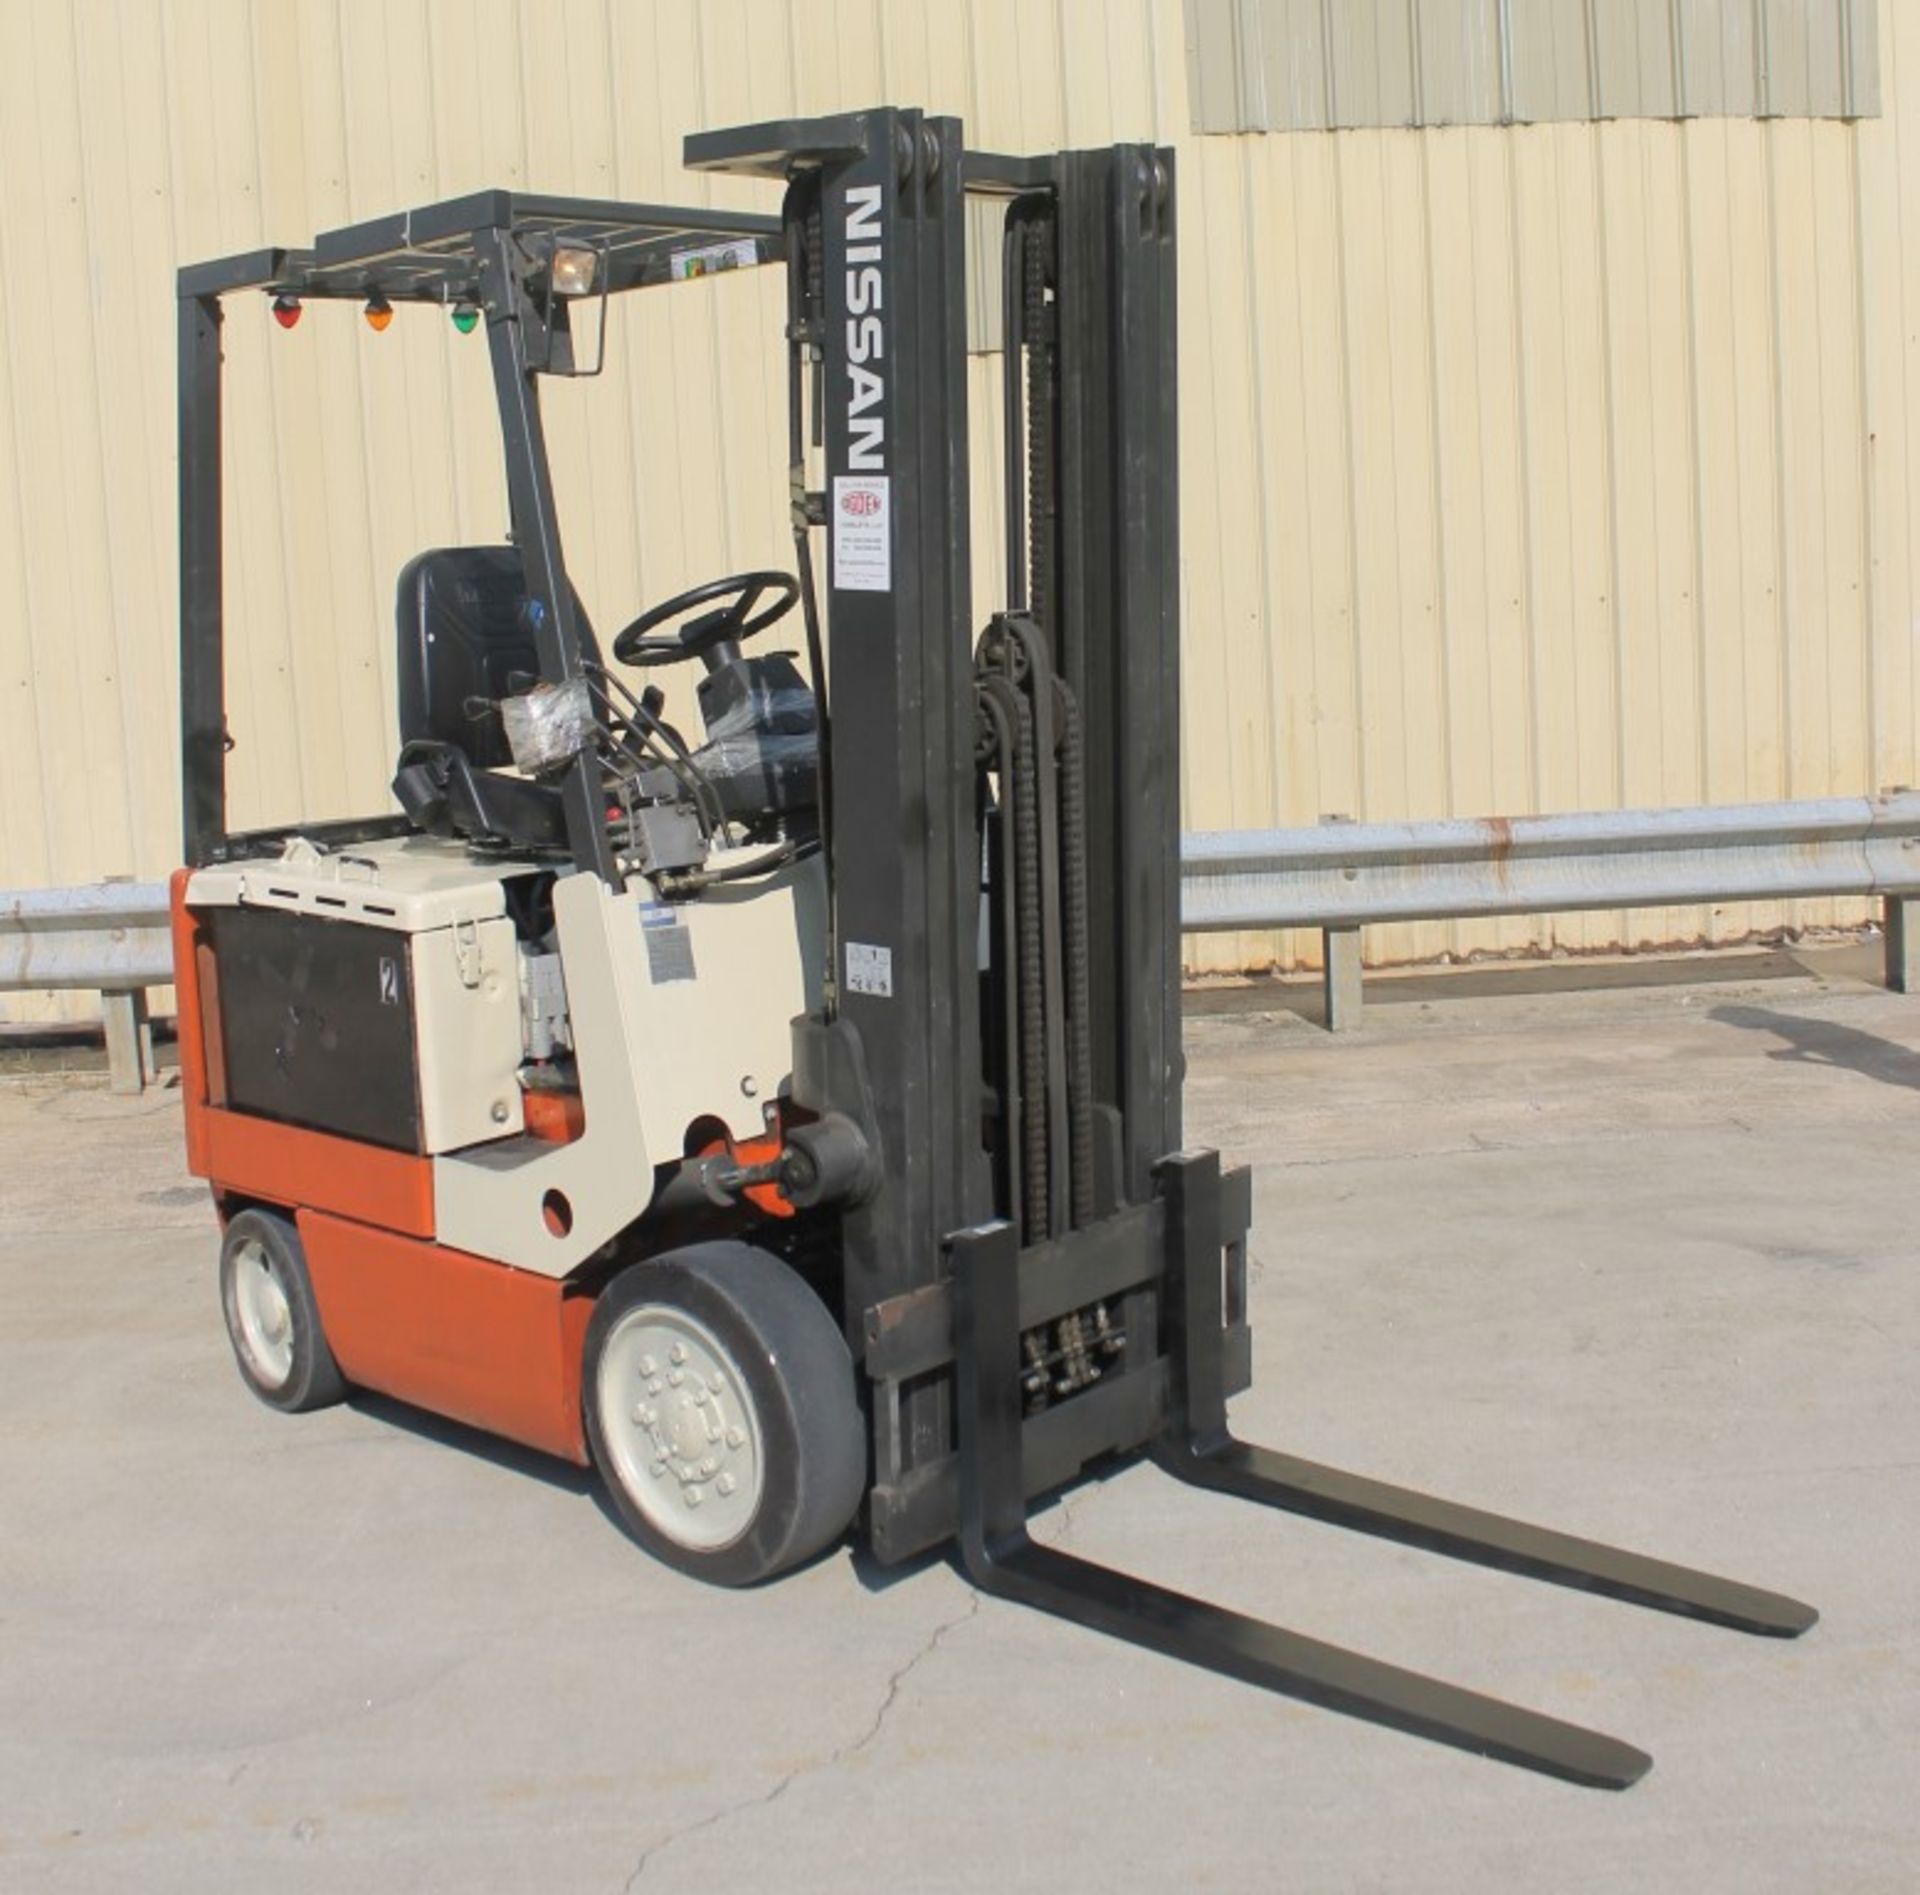 2003 NISSAN 4000 LBS CAPACITY ELECTRIC FORKLIFT WITH 2012 BATTERY, (WATCH VIDEO) - Image 2 of 5